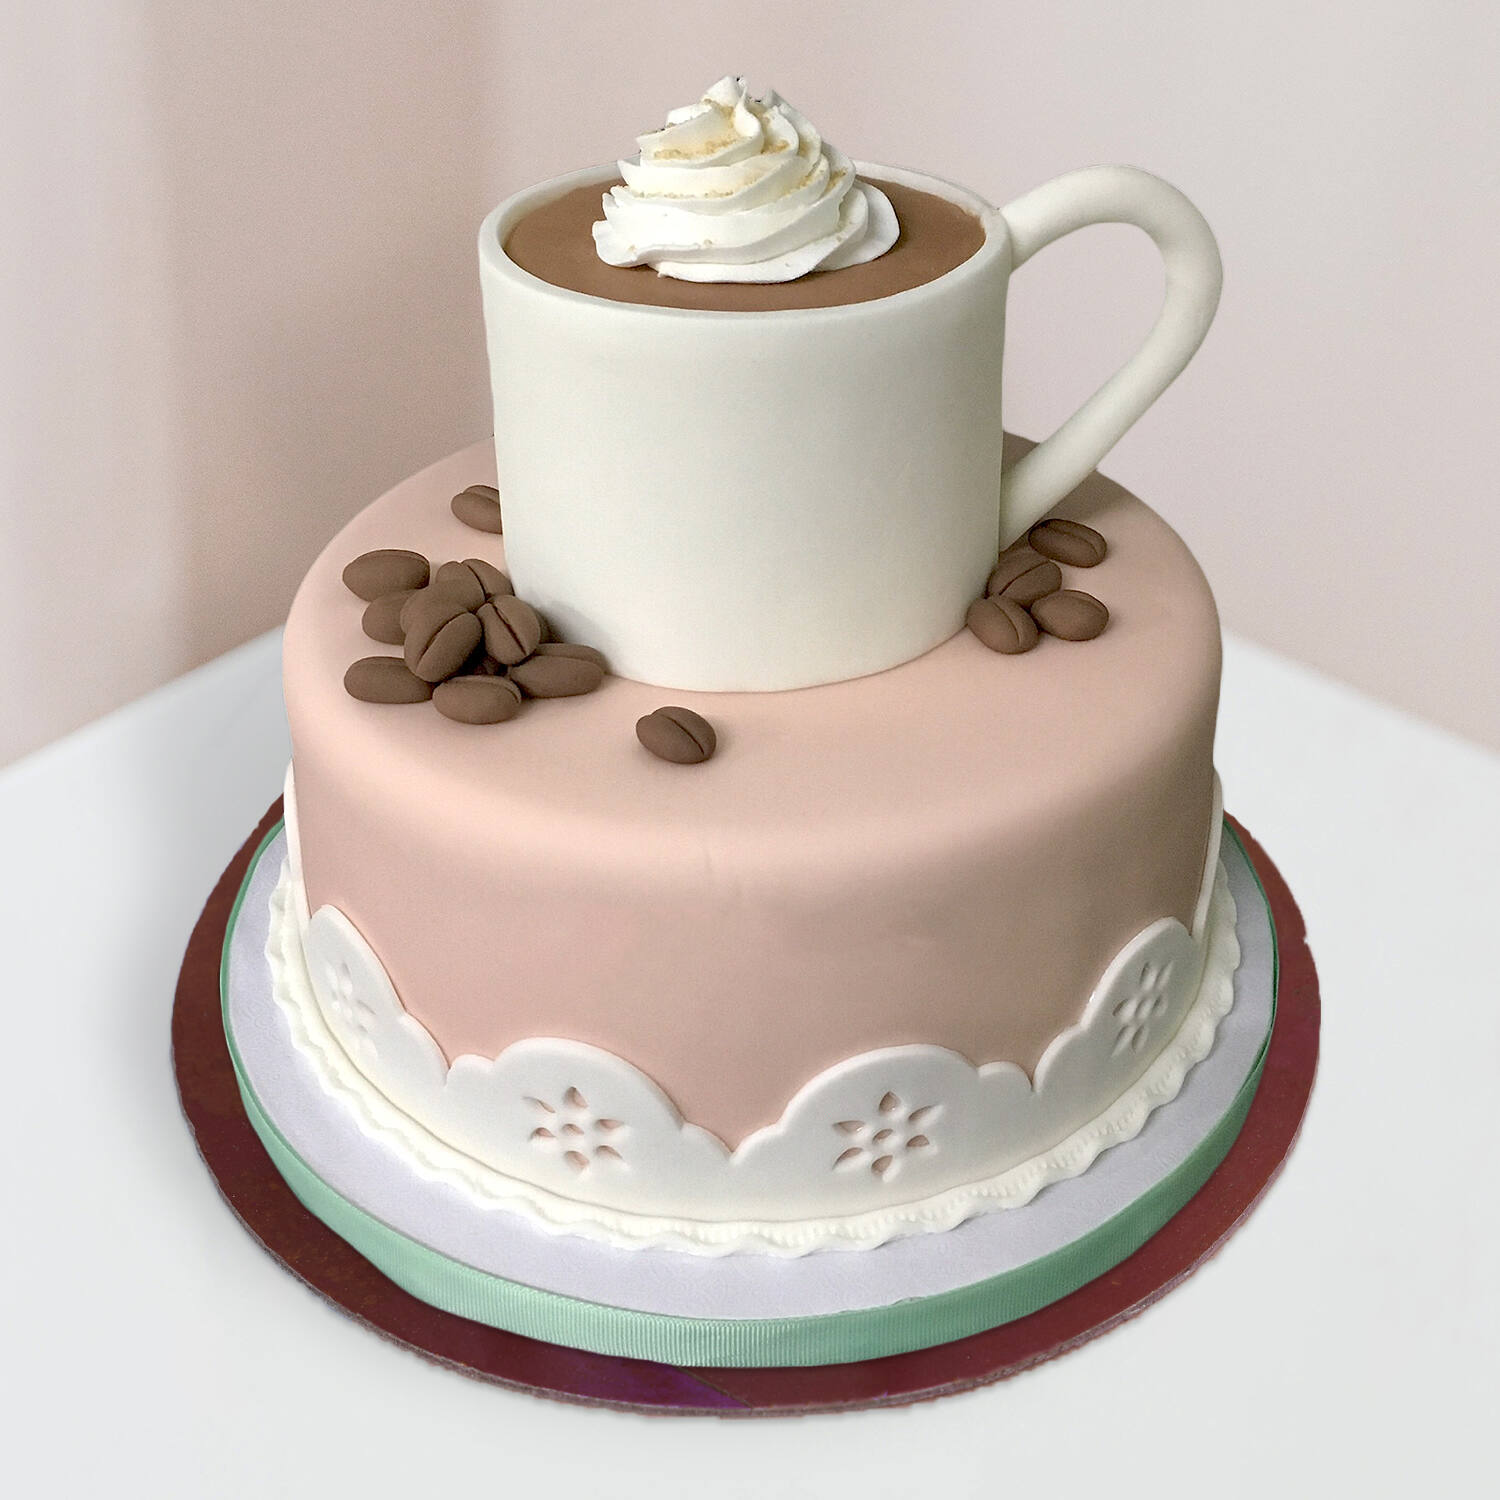 Time for coffee cake! - Decorated Cake by Cake Garden - CakesDecor